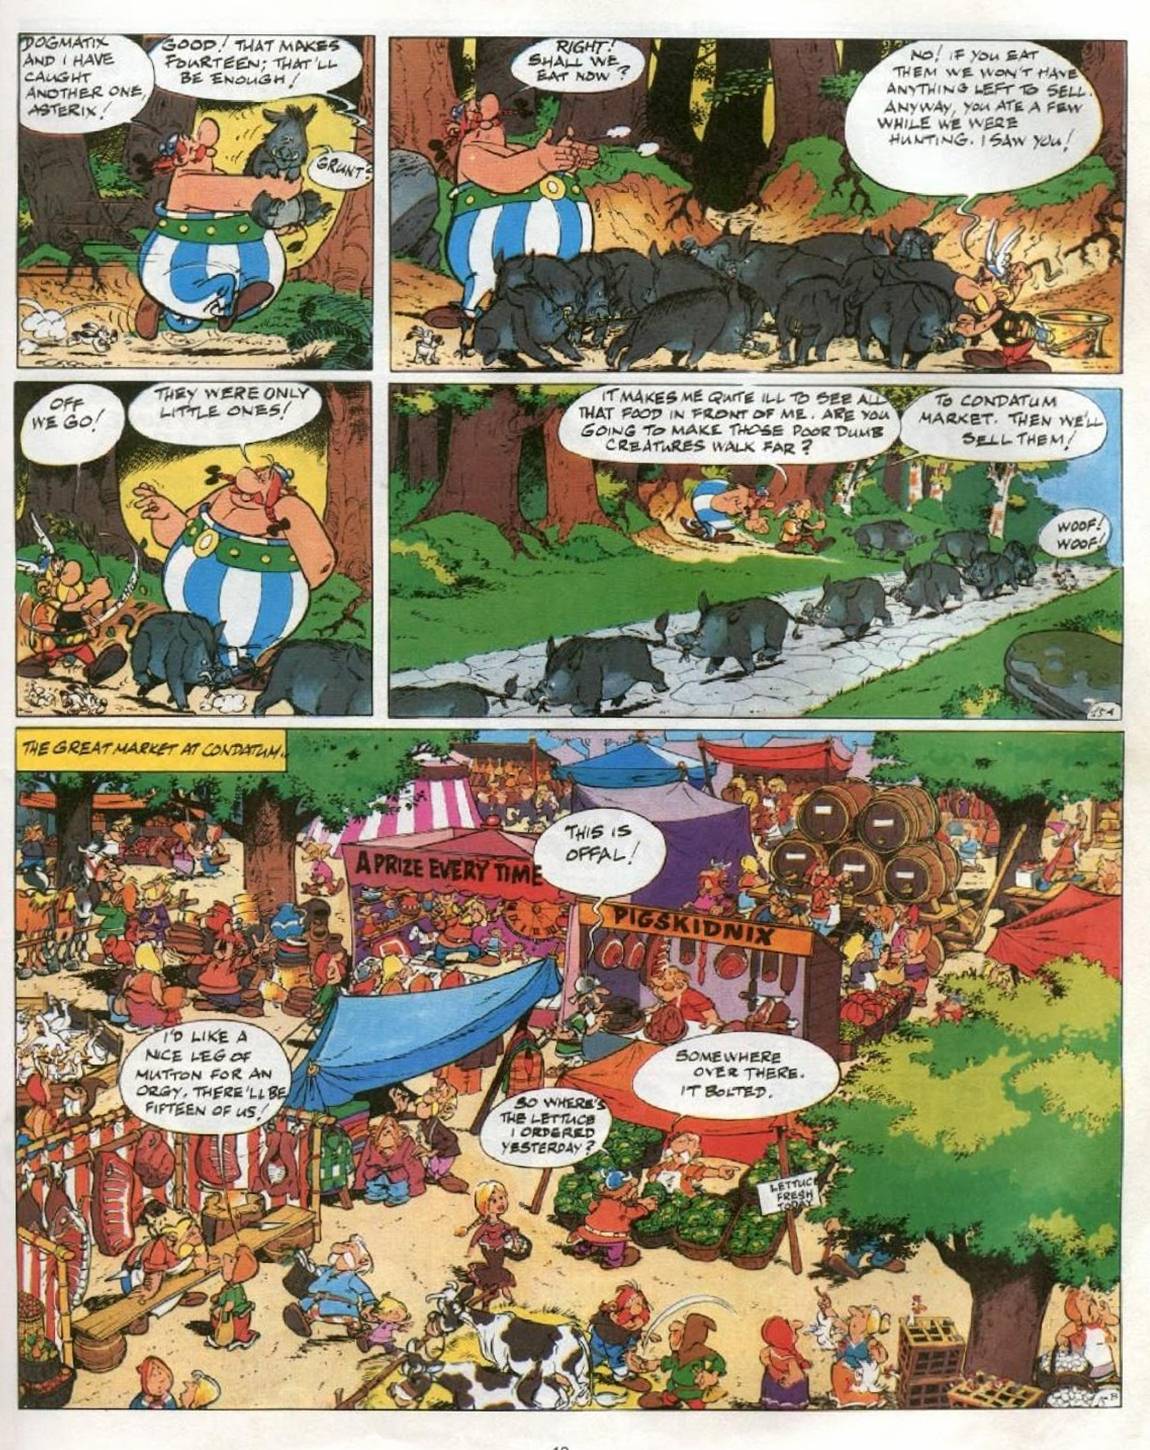 Asterix and the Cauldron review